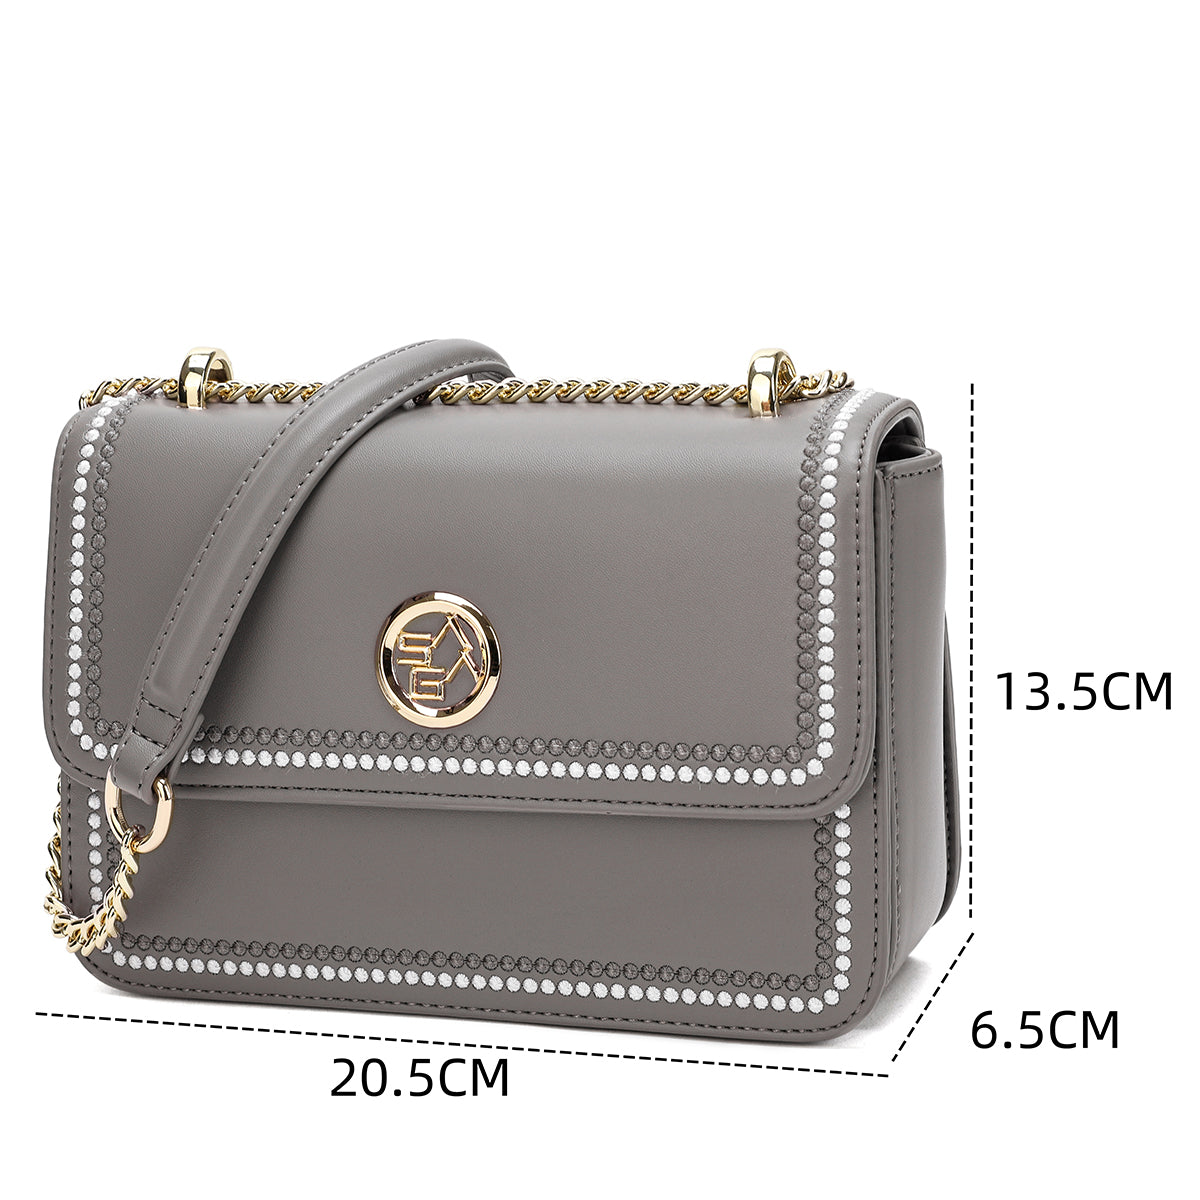 An elegant bag embroidered with crystals for attractiveness, width 20.5 cm, color Taupe